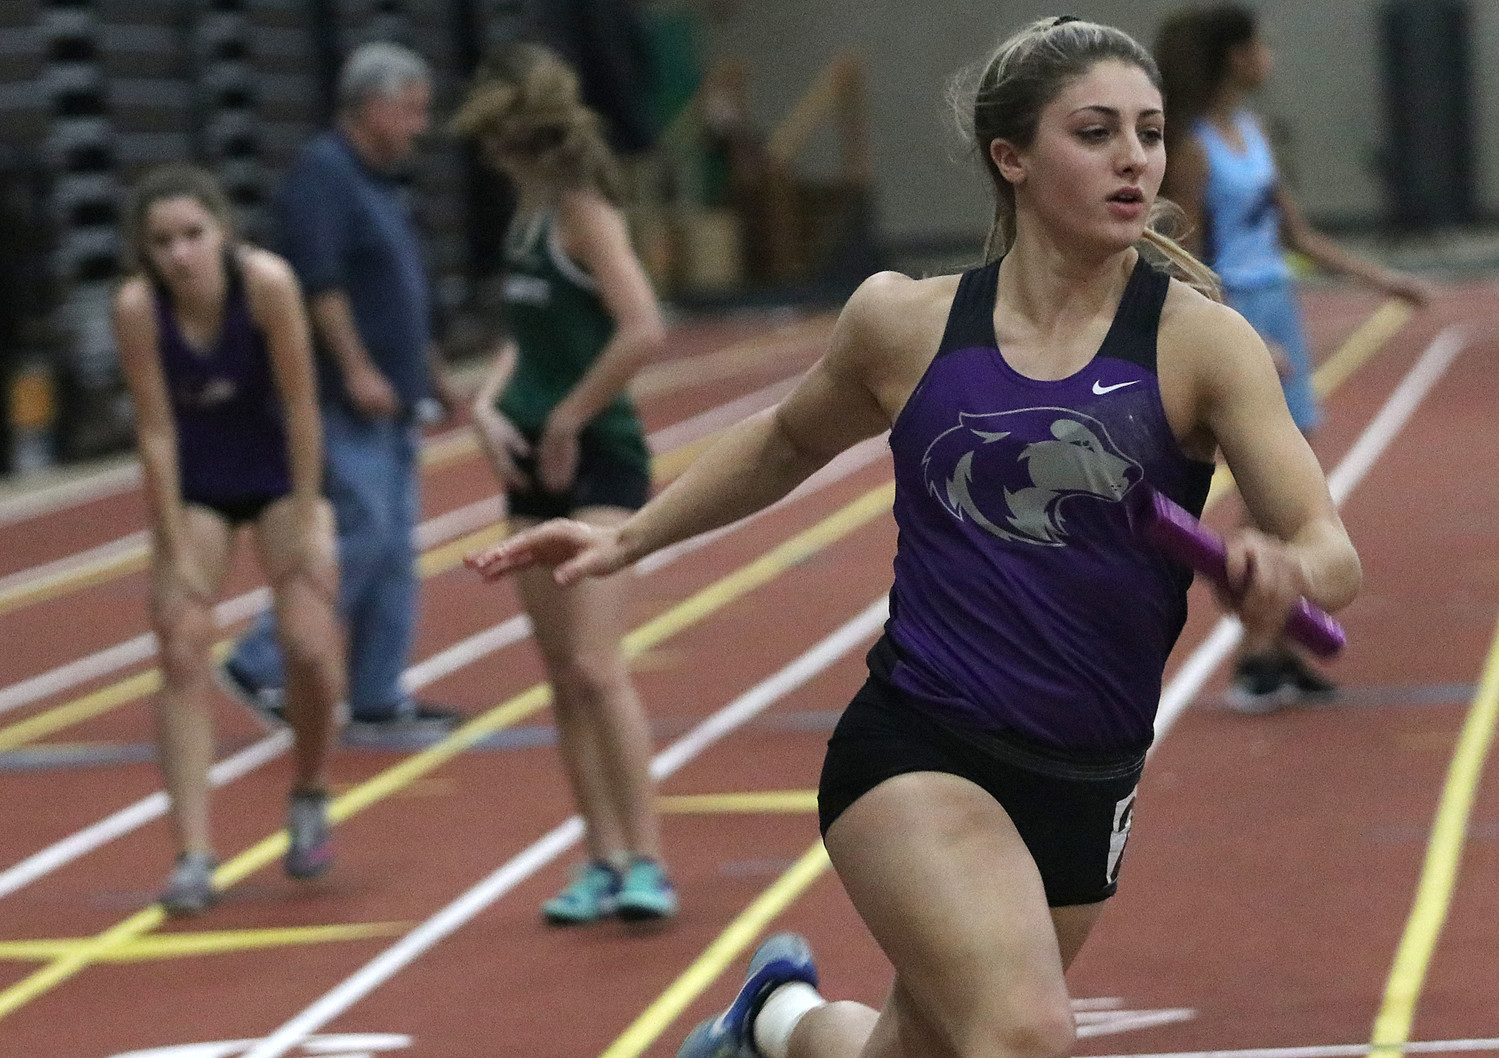 Meghan Oliver takes the baton from Leah Womelsdorf during the 4x200 meter relay.